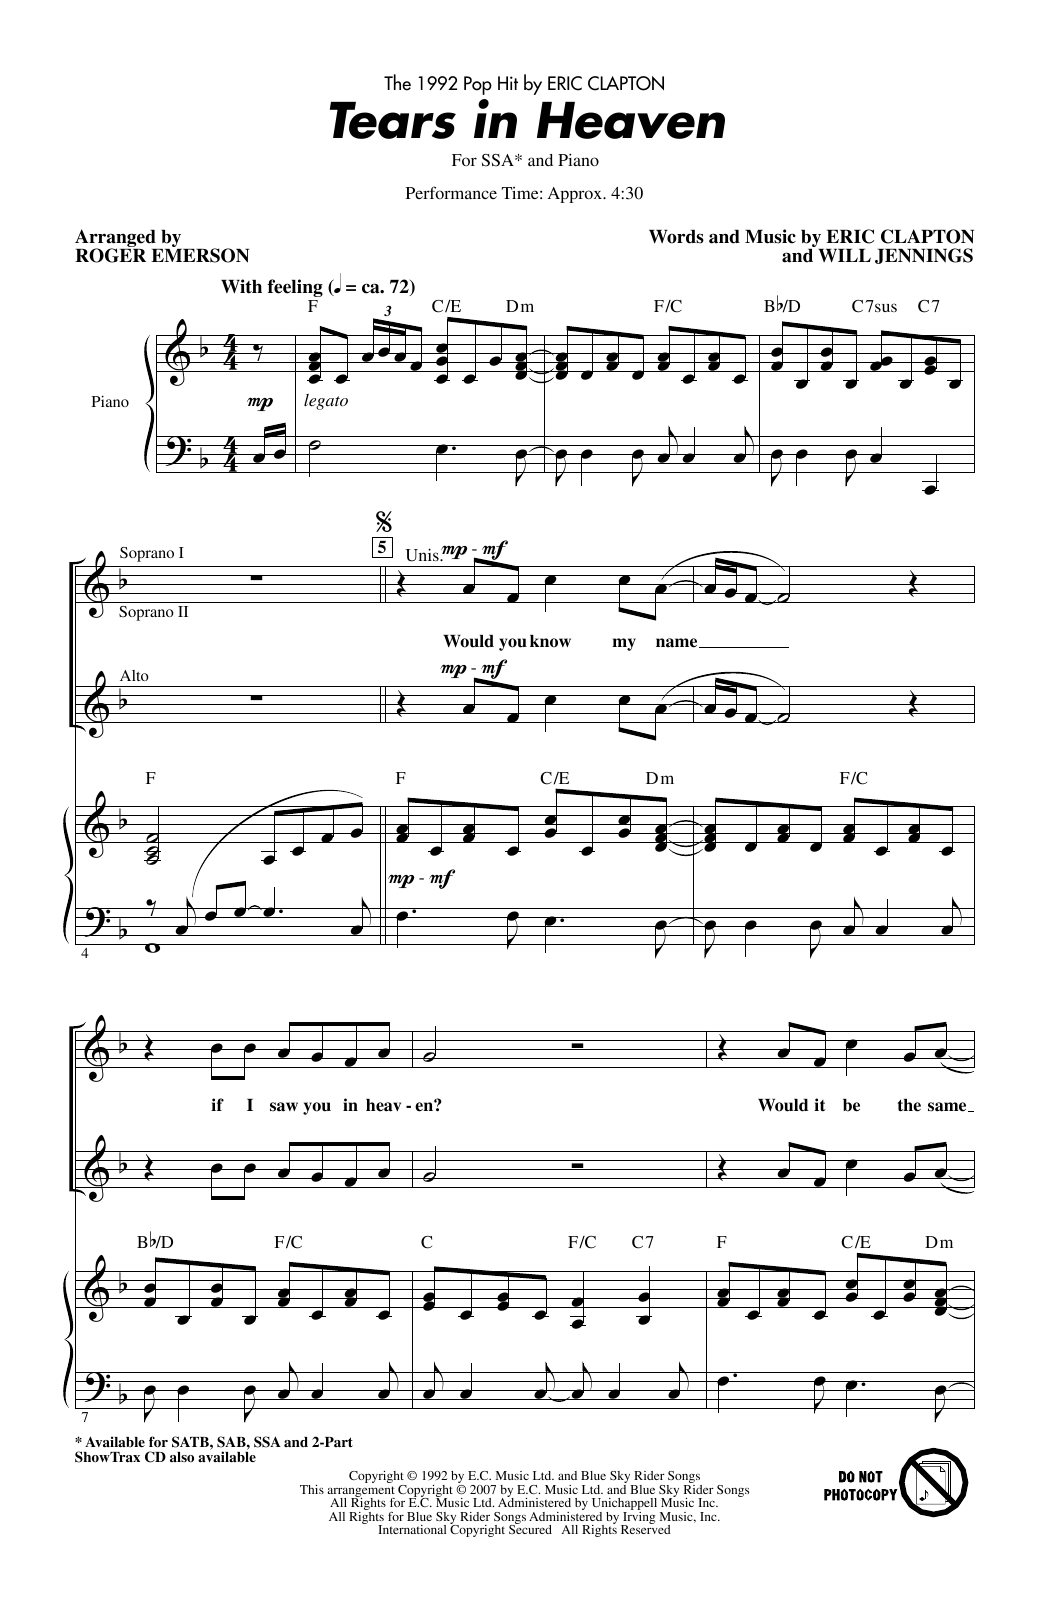 Download Eric Clapton Tears In Heaven (arr. Roger Emerson) Sheet Music